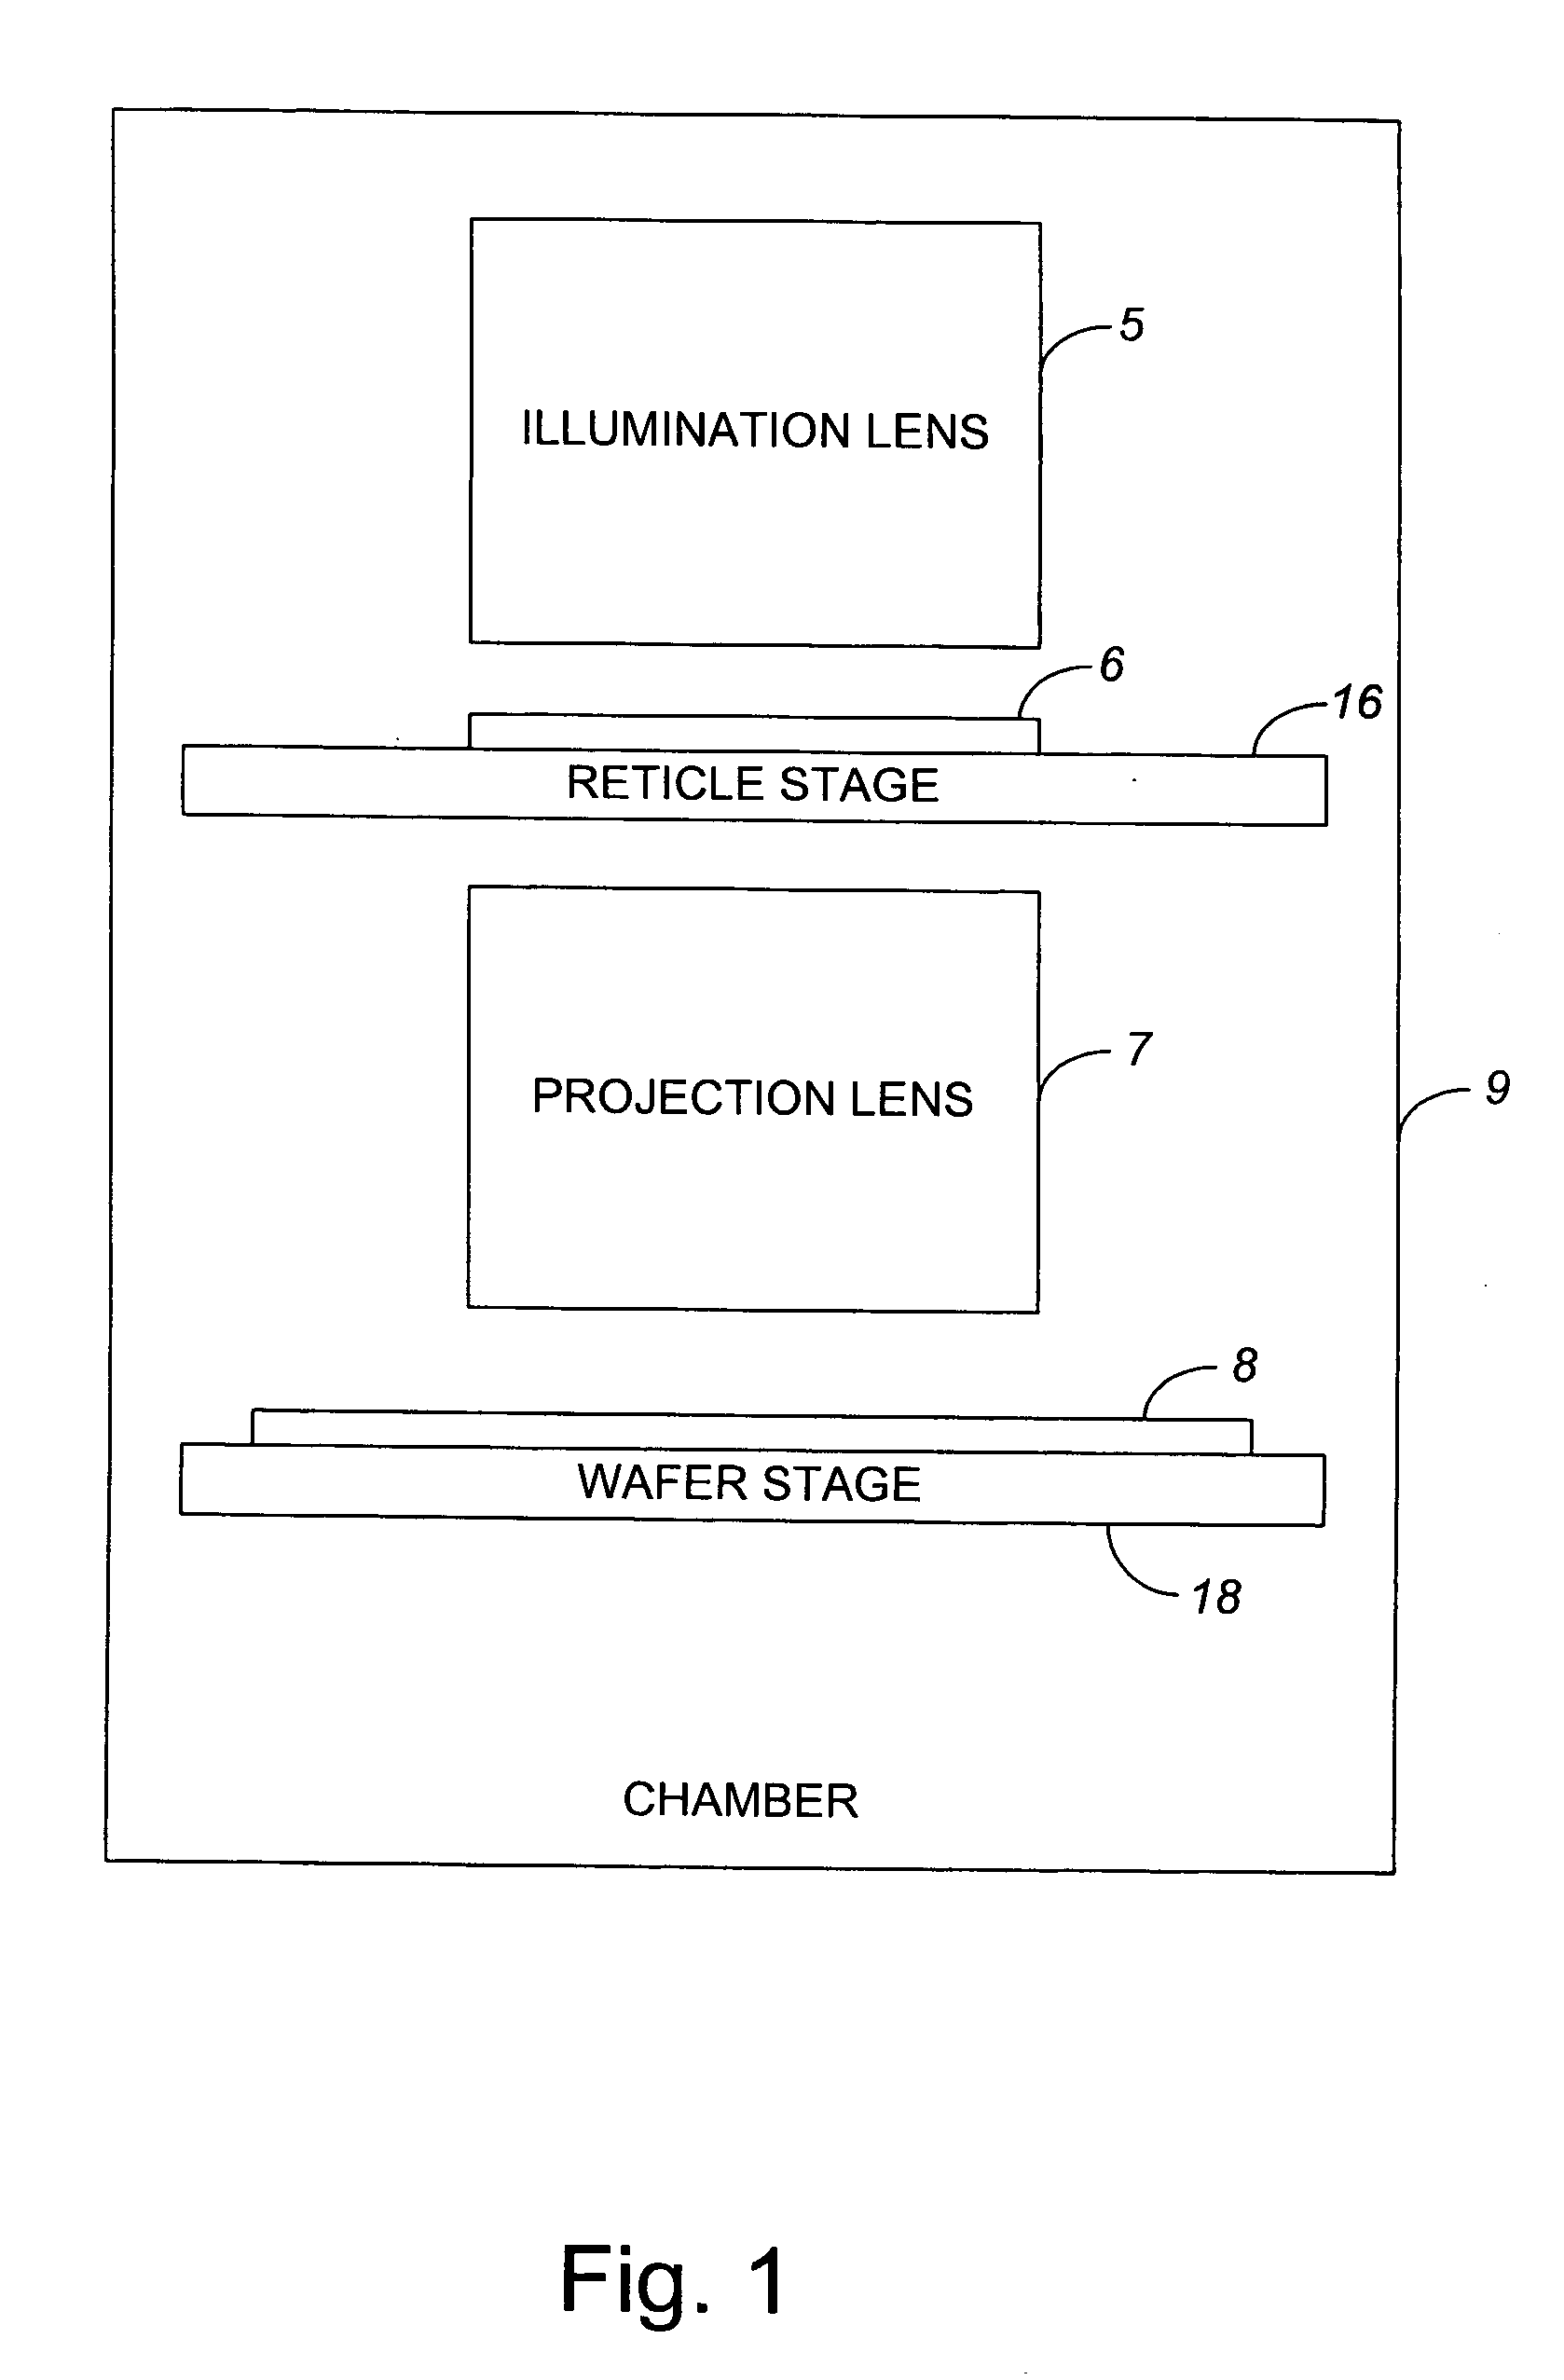 Air bearing compatible with operation in a vacuum